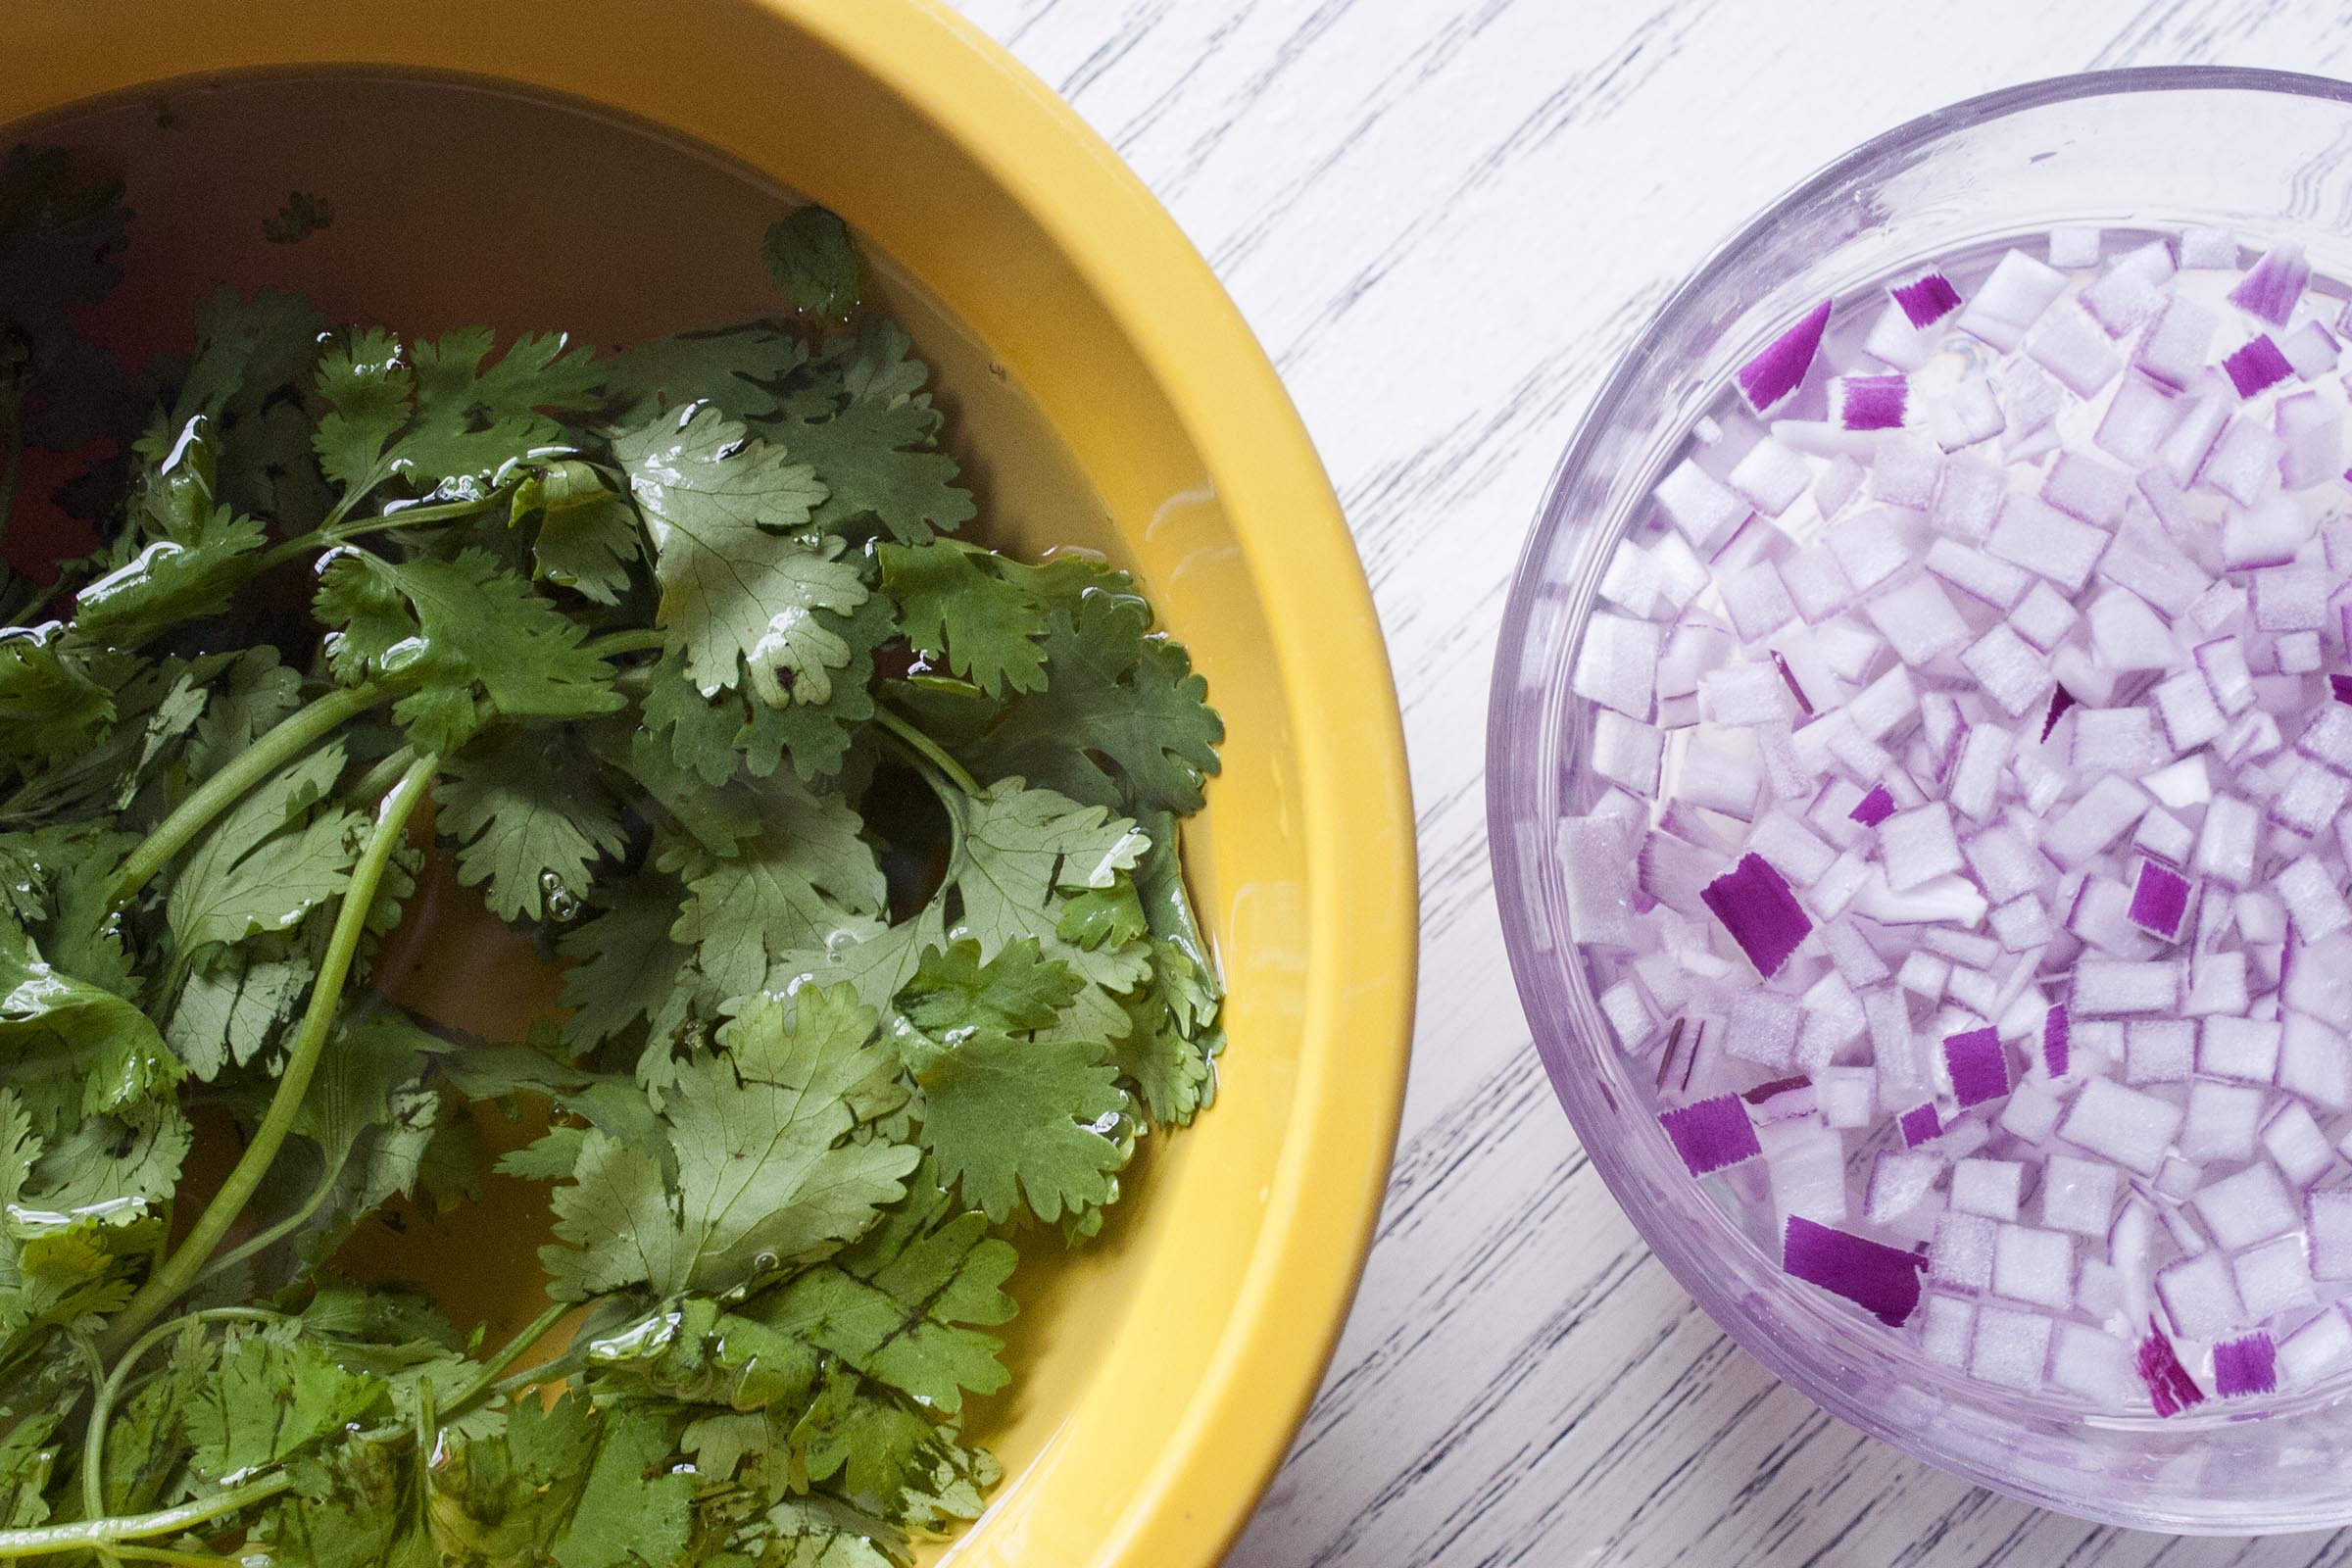 Soaking Cilantro and Red Onions to remove grit and sharpness for Fresh Tomatillo & Avocado Salsa. www.lifeaswecookit.com